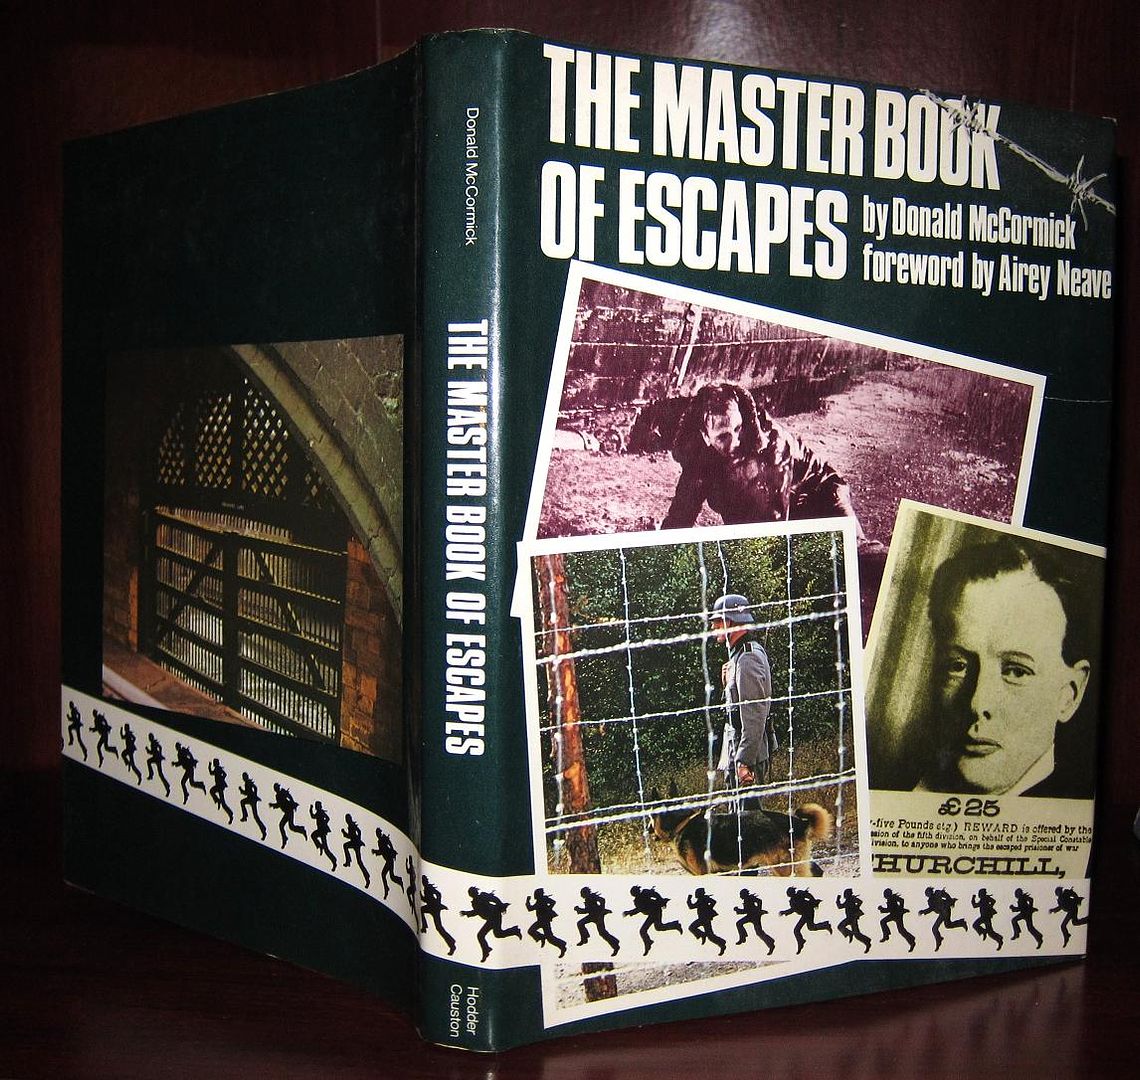 MCCORMICK, DONALD - The Master Book of Escapes : The World of Escapes and Escapists from Houdini to Colditz Keys, Locks and Chains Rafts, Jungles and Prisons Survival Against All the Odds